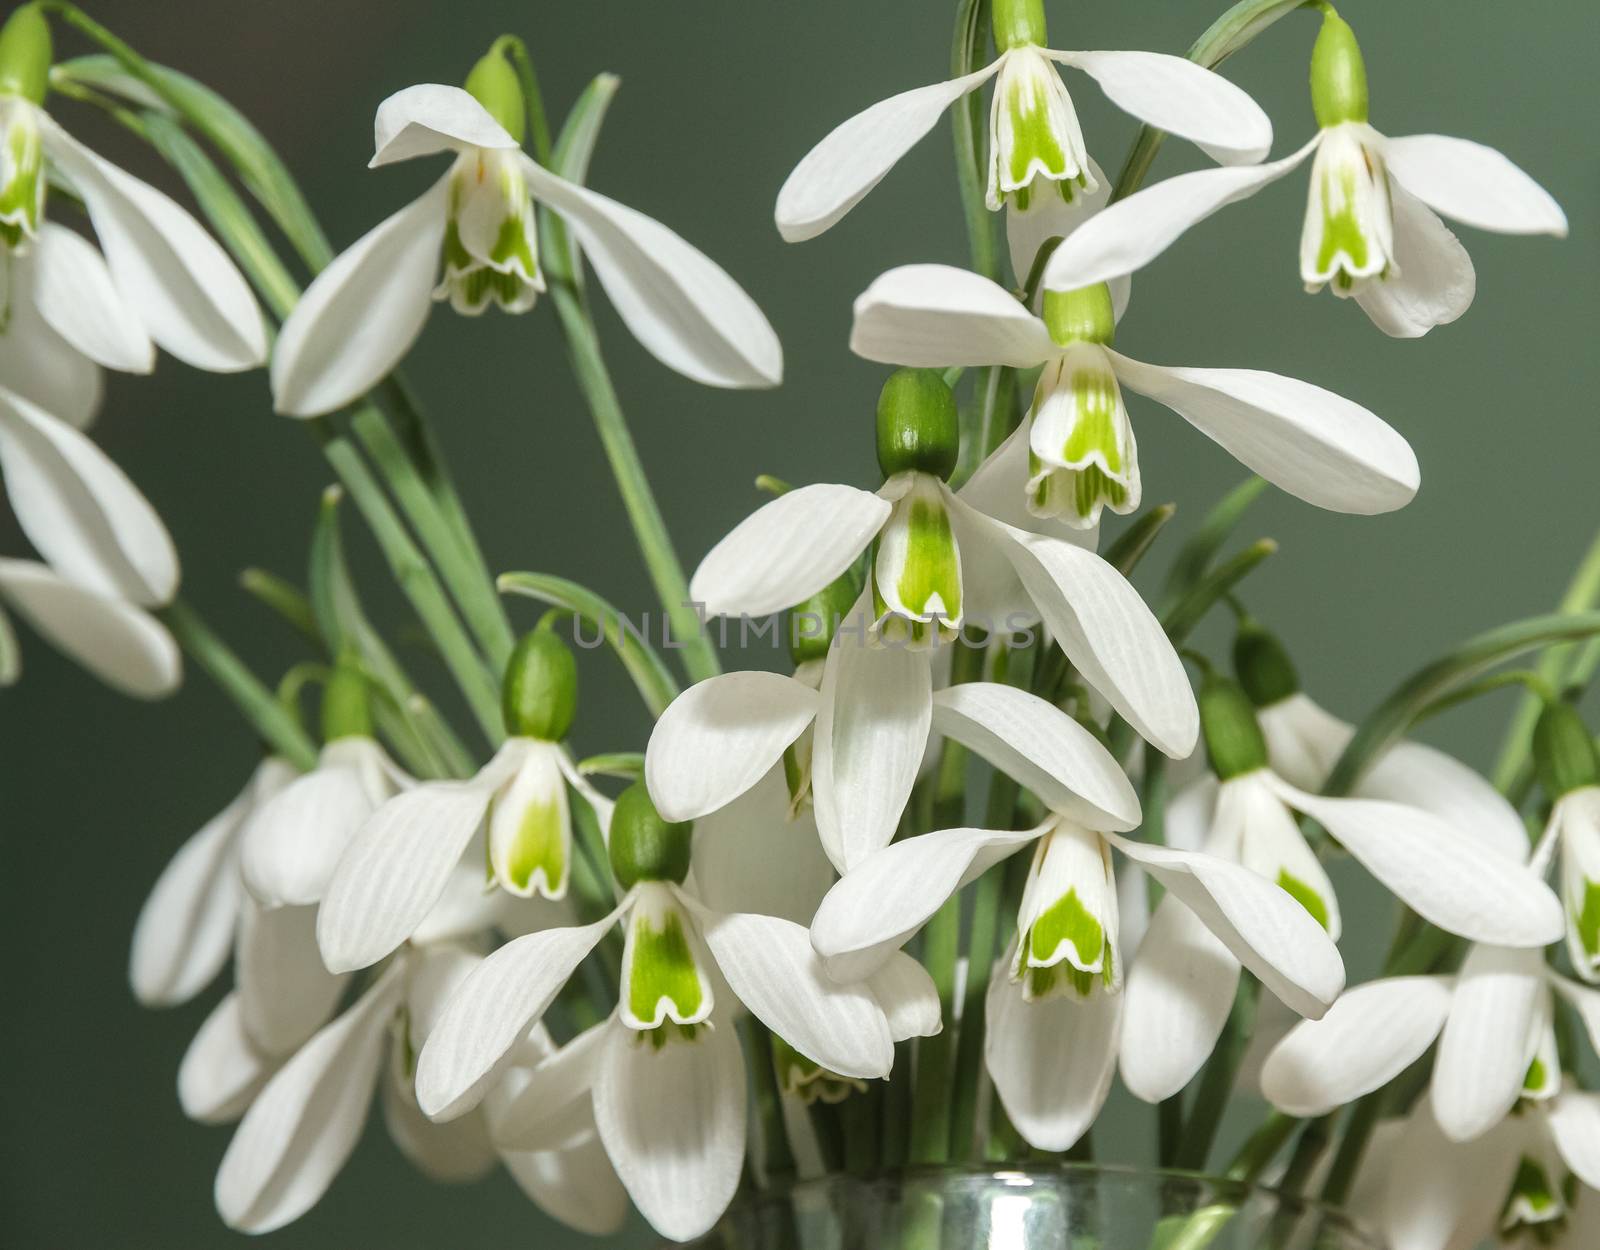 Few snowdrops from the snow by fogen